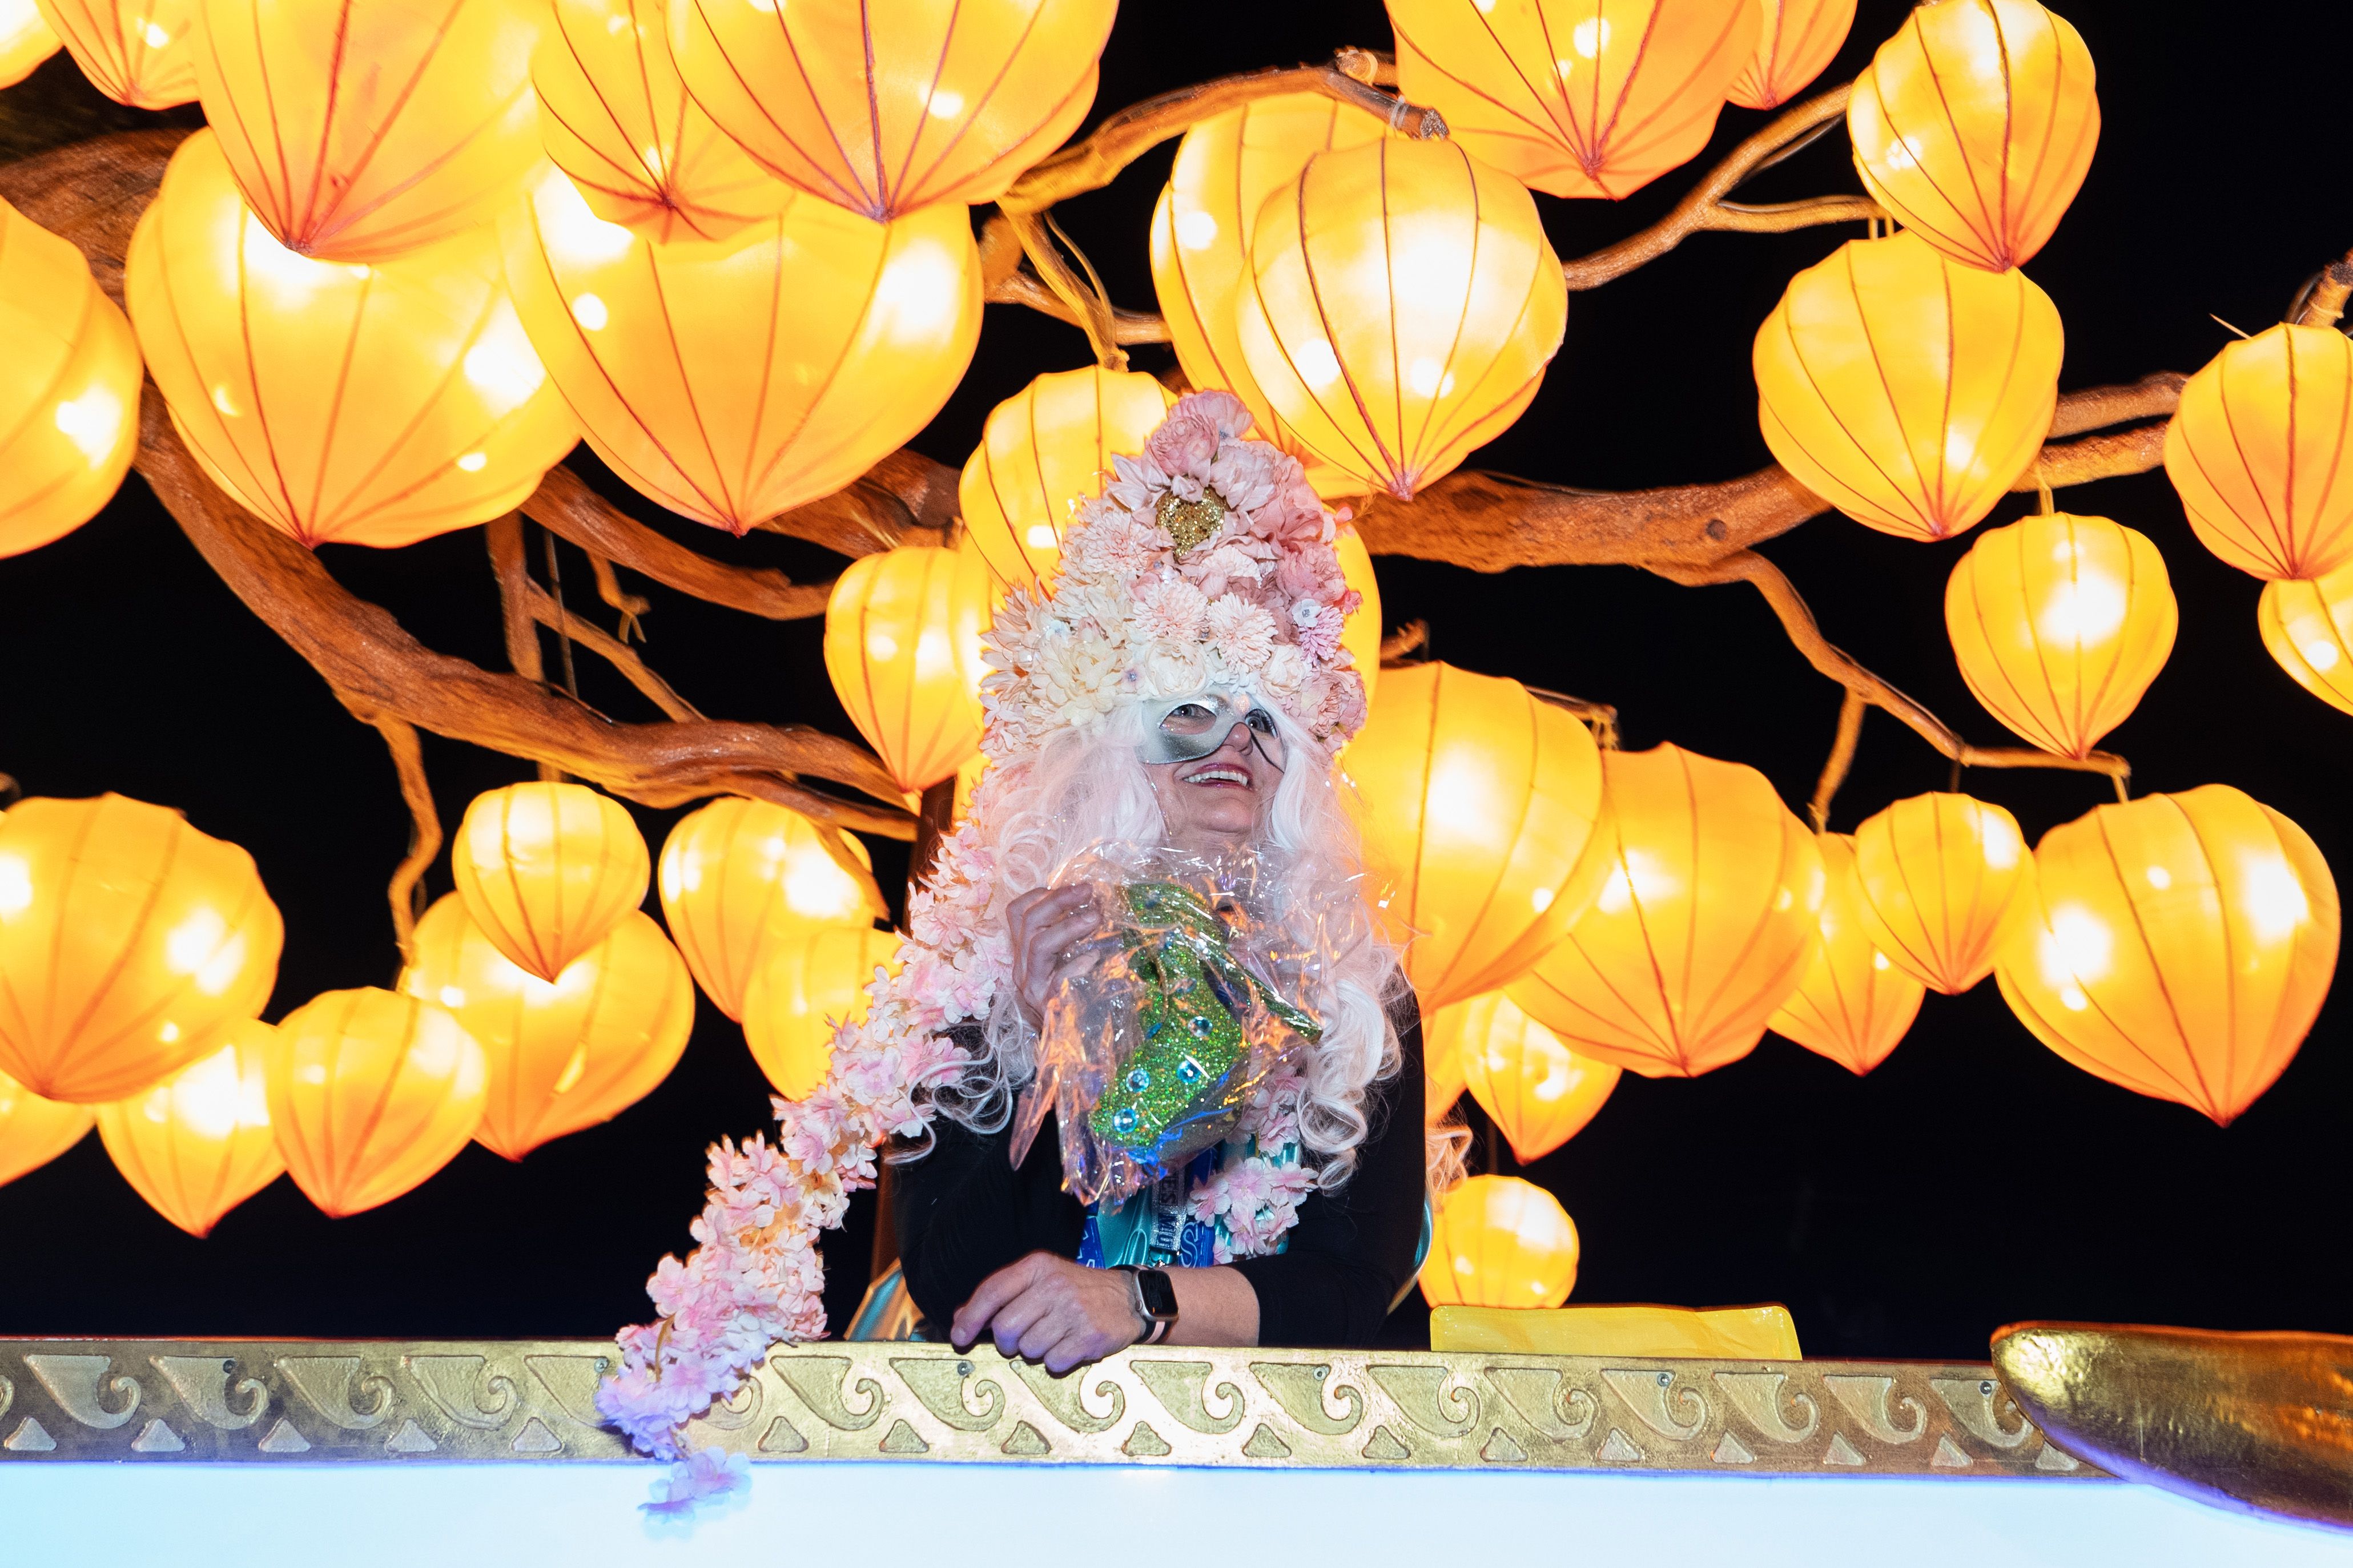 Photo shows a woman riding on a Krewe of Muses float